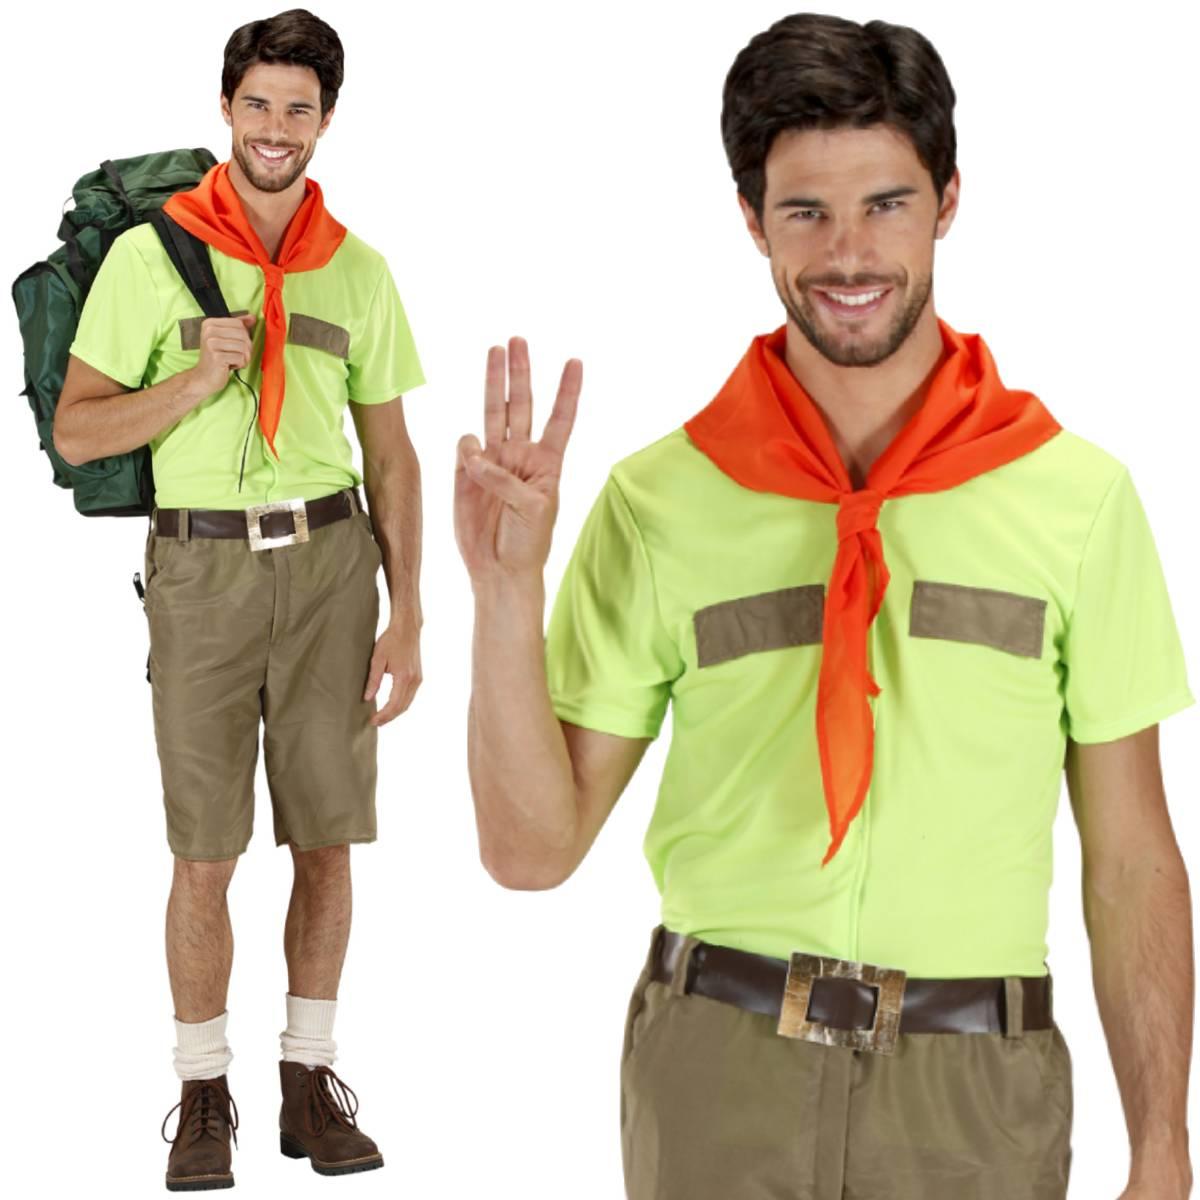 Extra Large Boy Scout costume by Widmann 7608B available here at Karnival Costumes online party shop